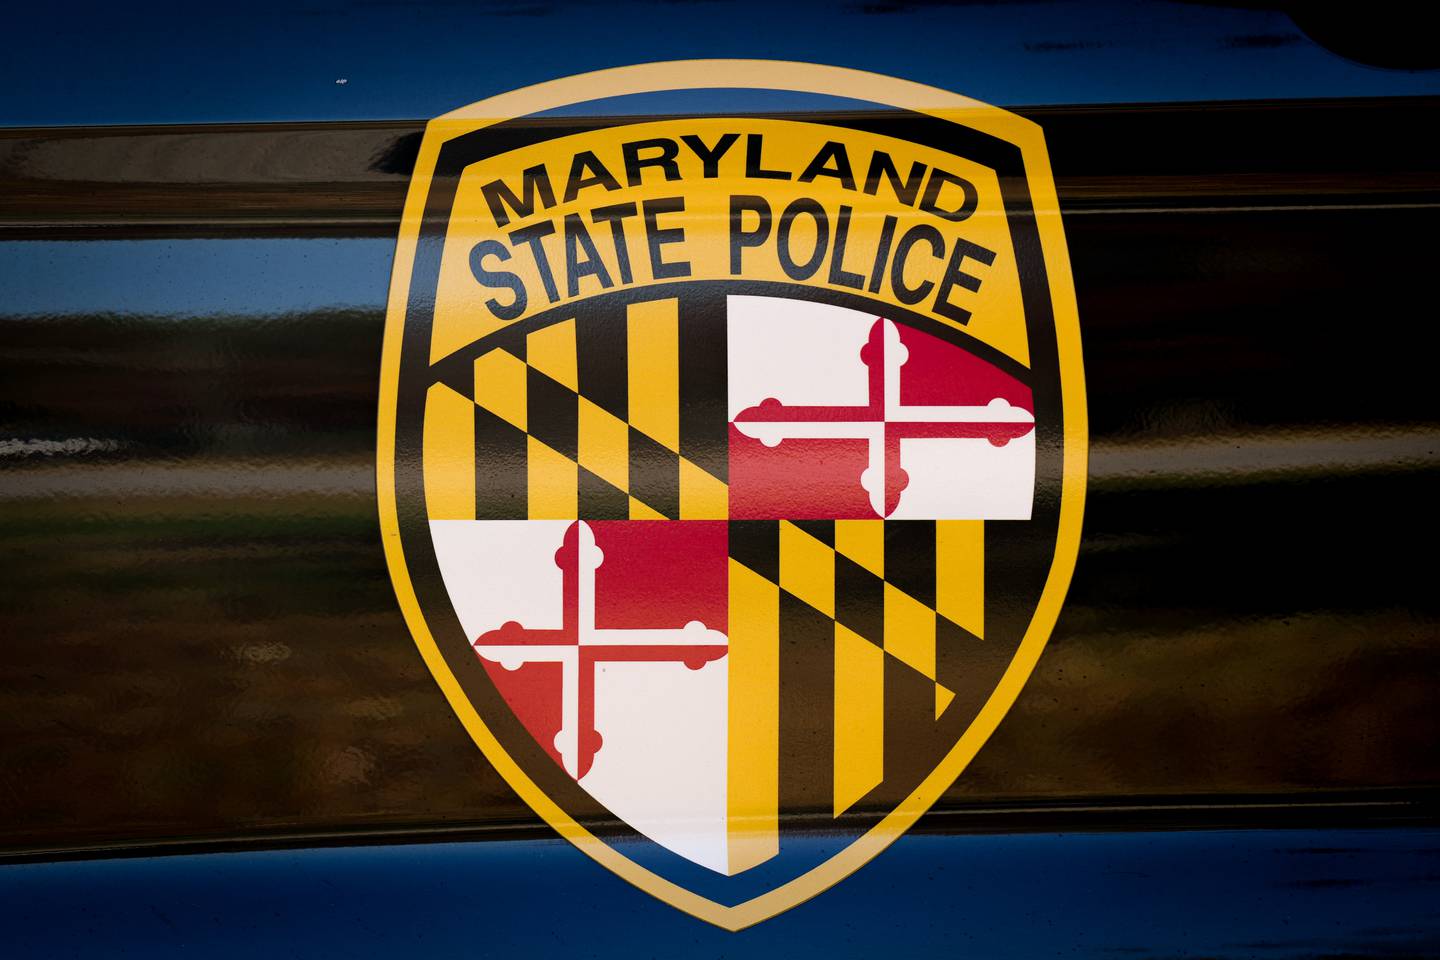 The Maryland State Police logo.